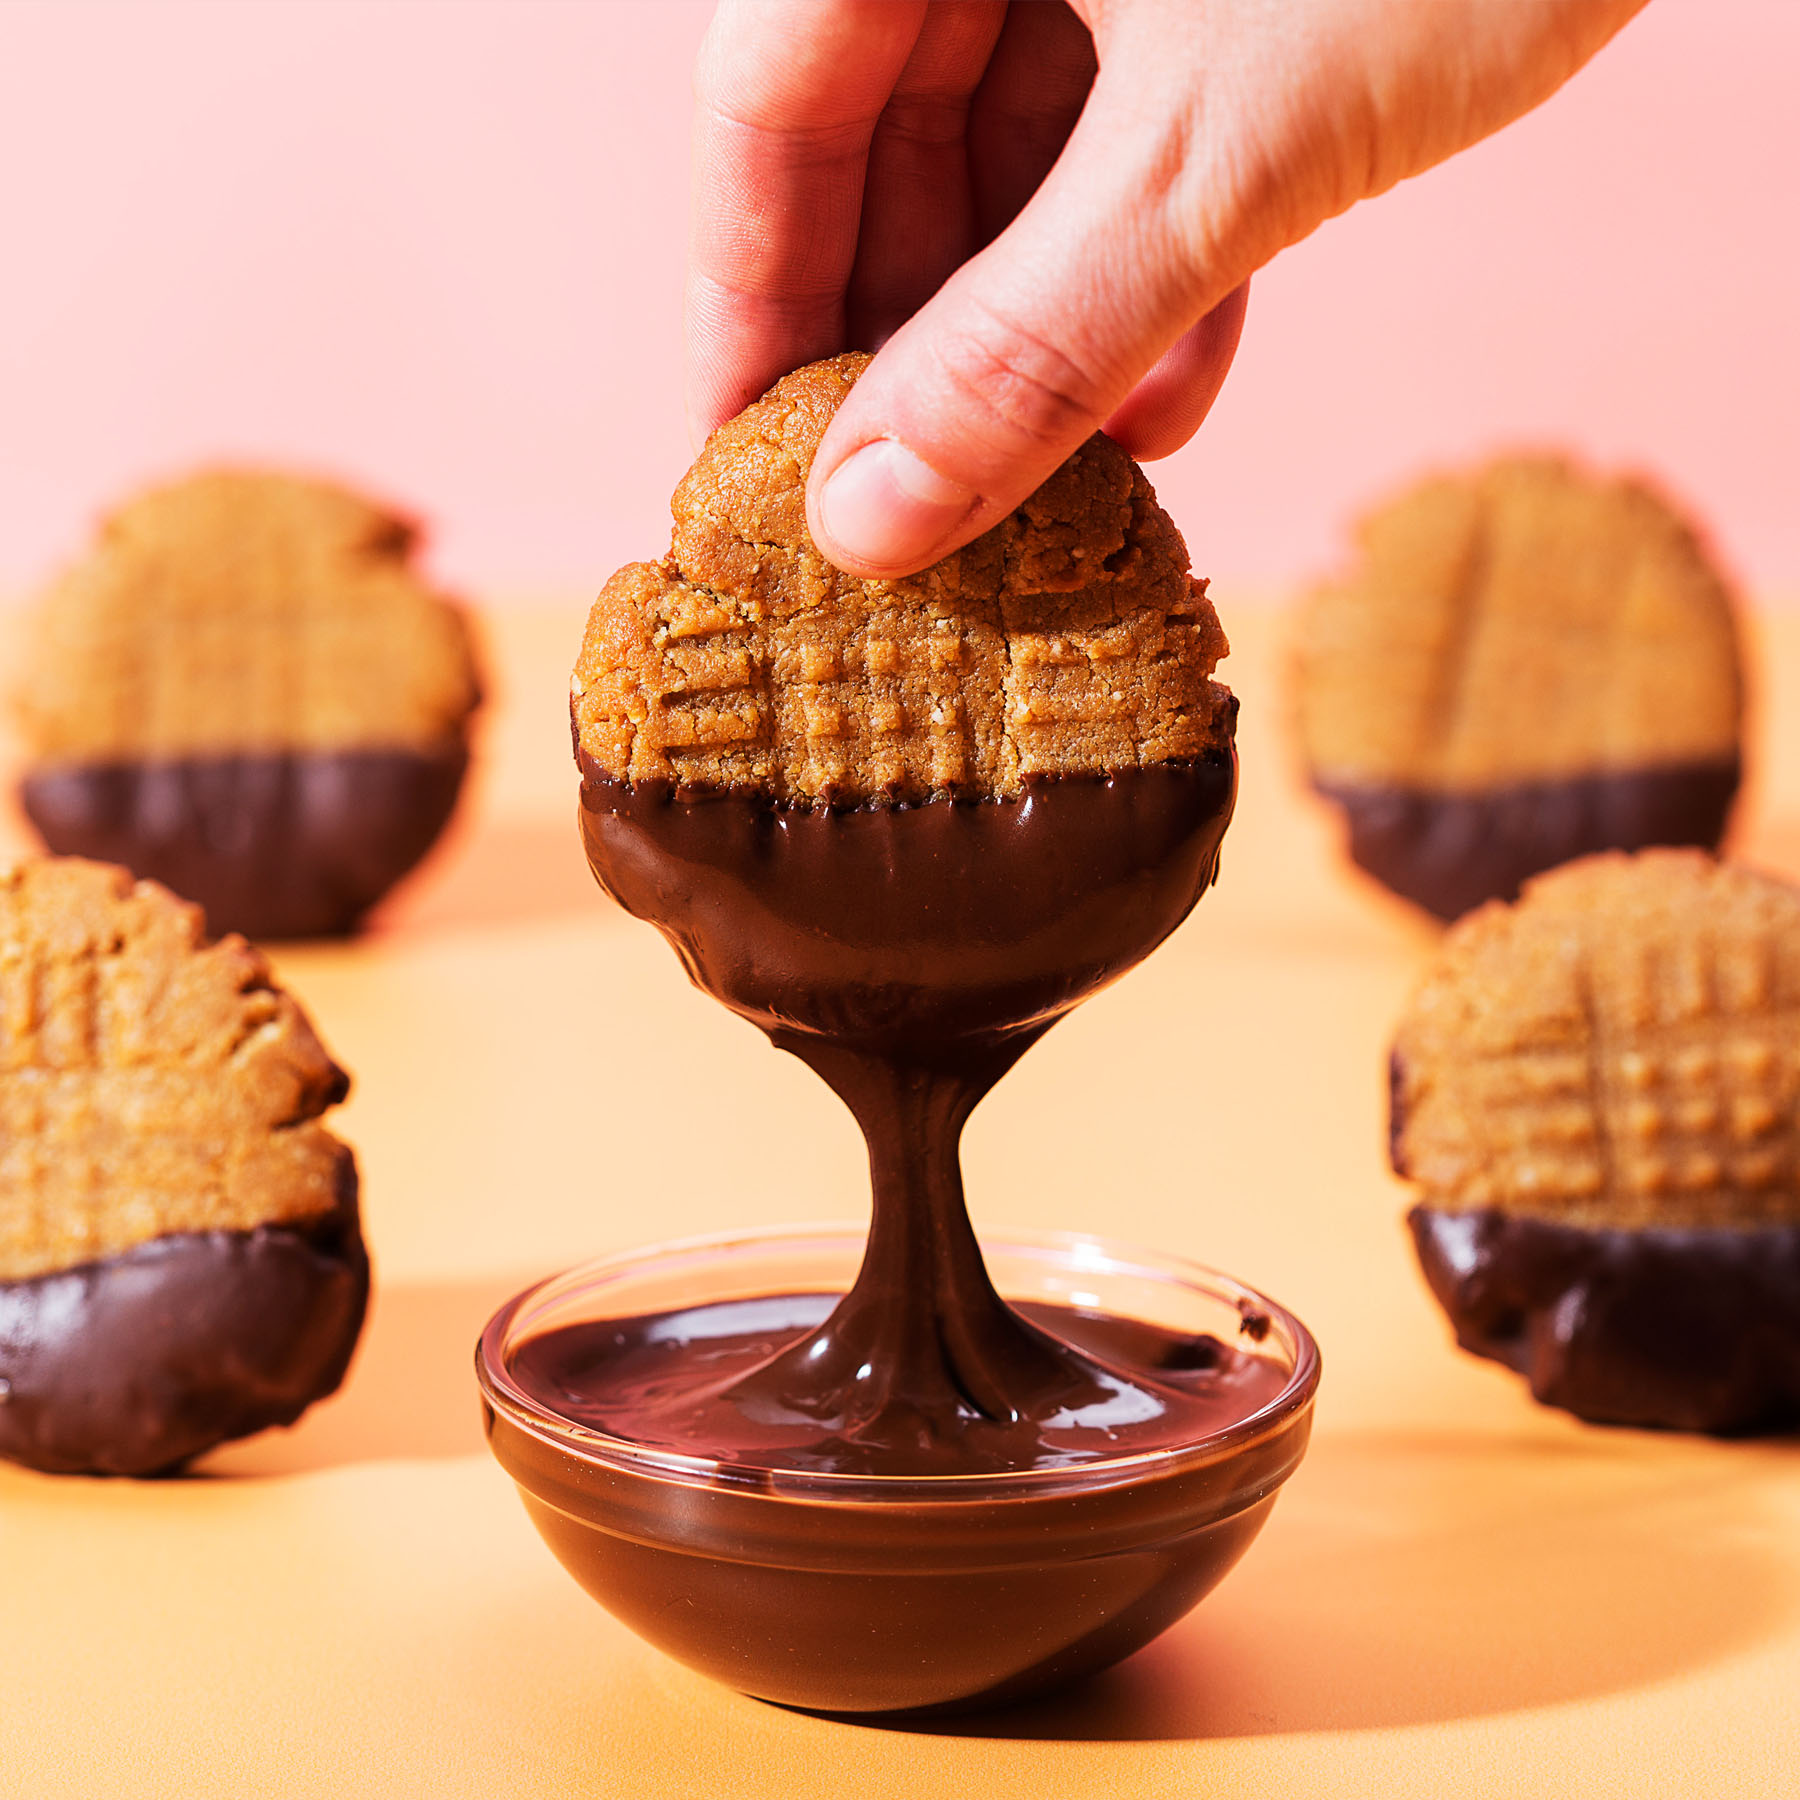 Keto Chocolate Dipped Peanut Butter Cookies